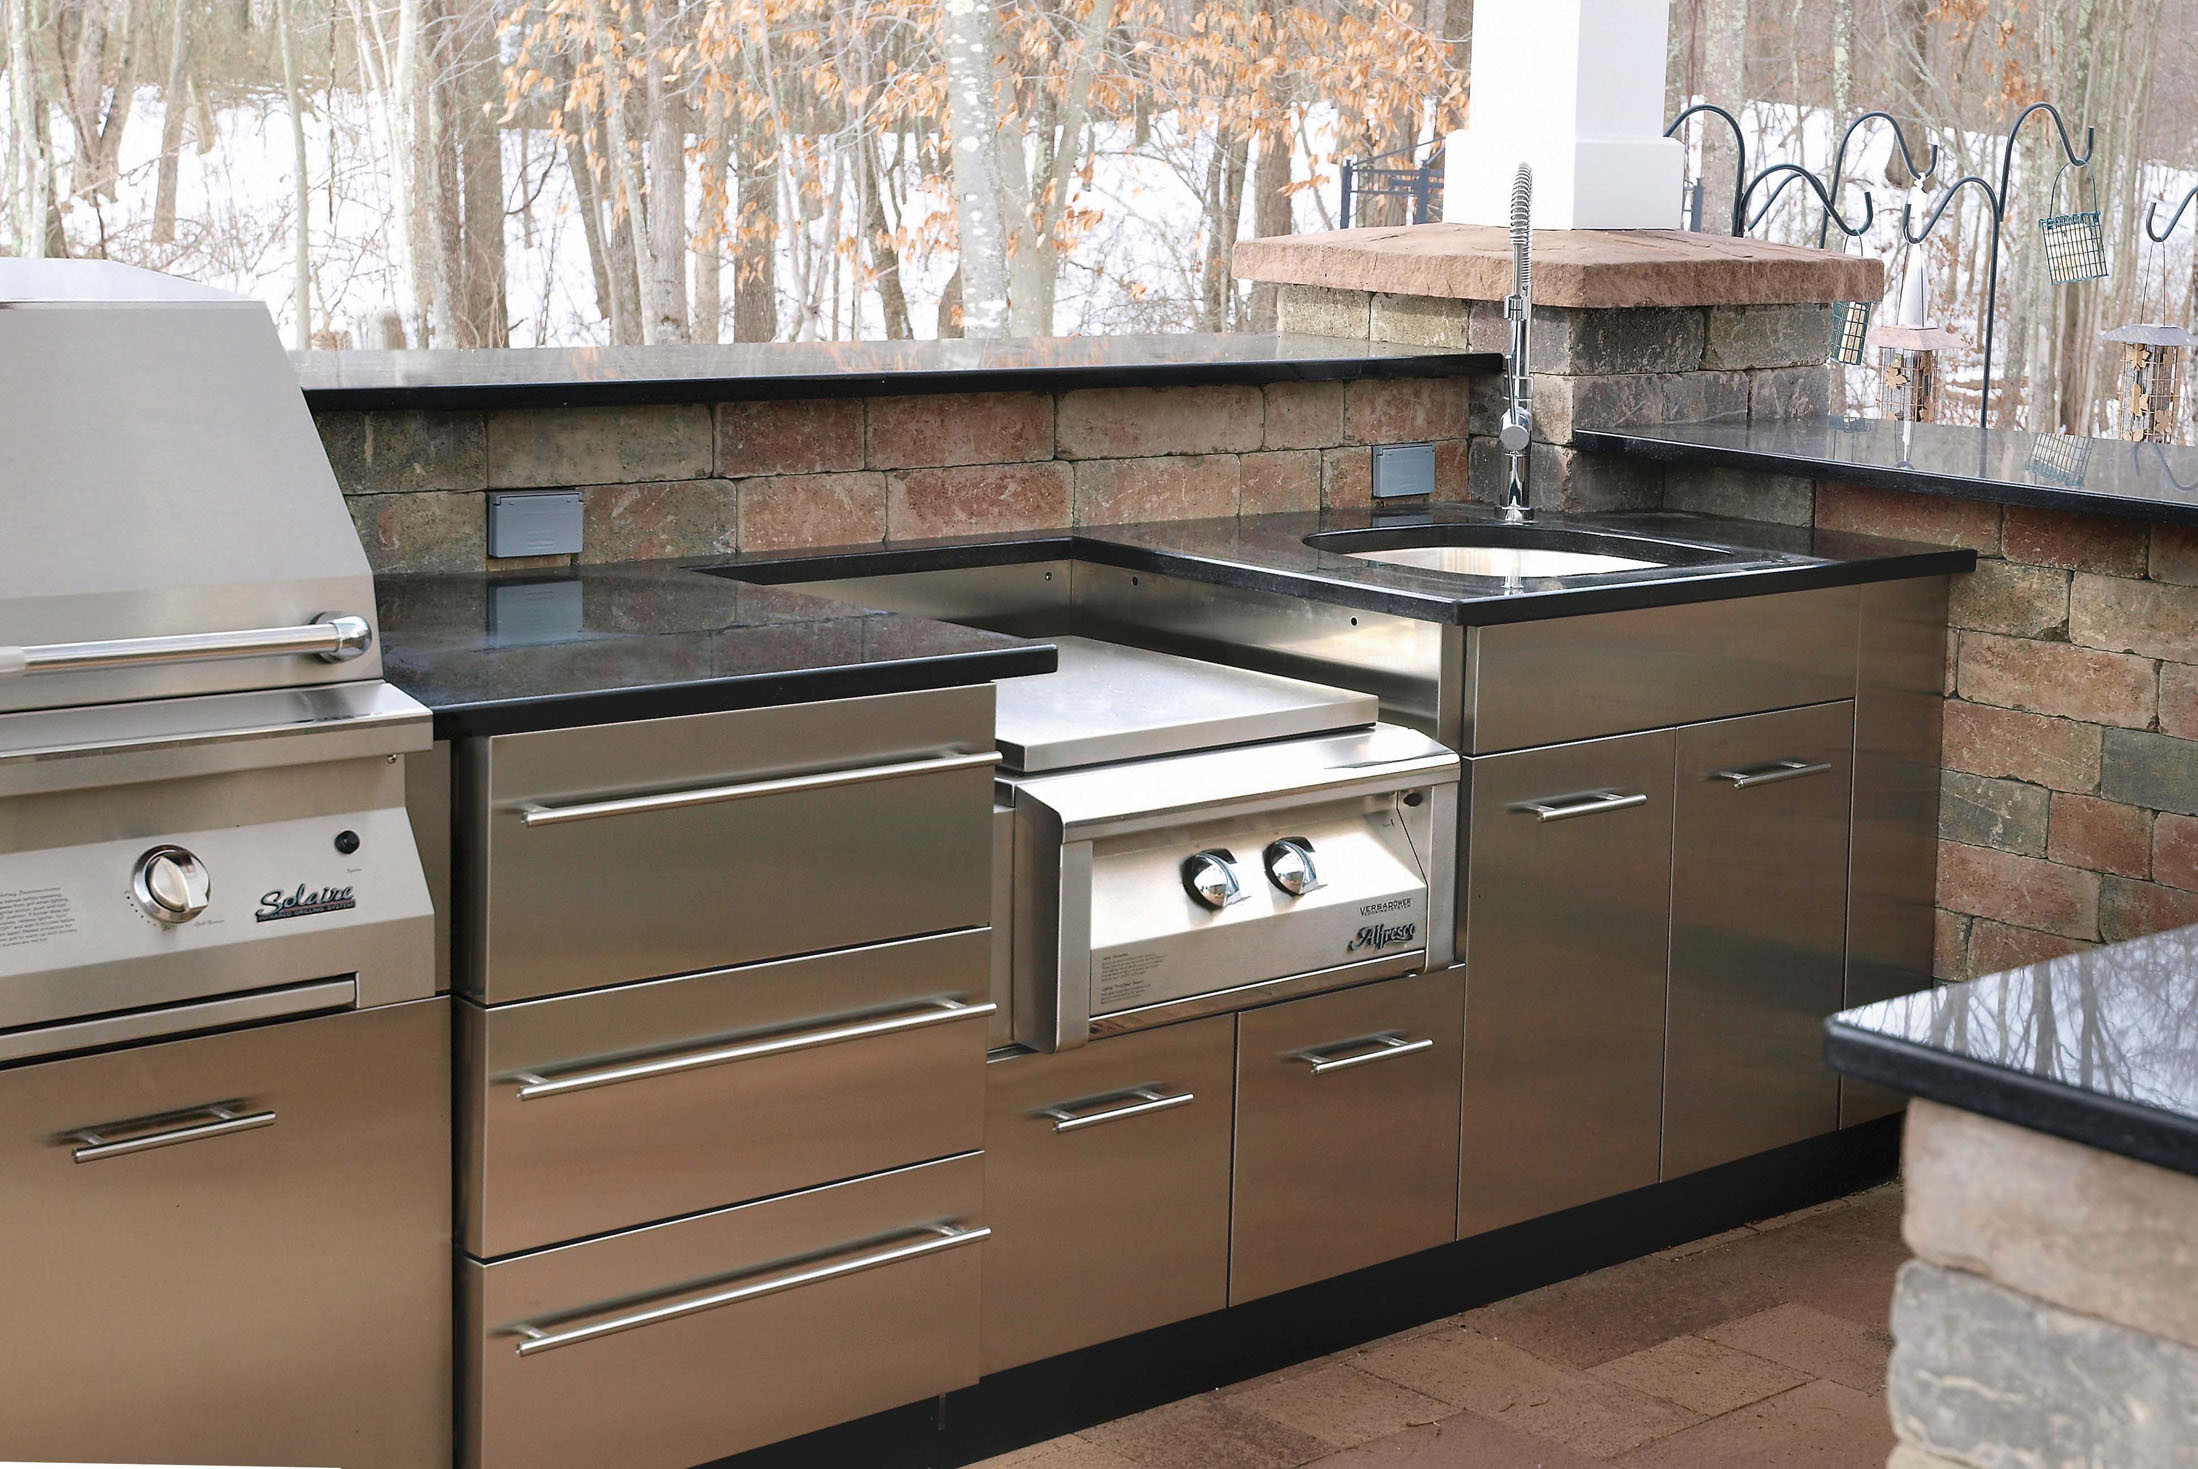 Stainless Outdoor Kitchen
 Outdoor Stainless Kitchen in winter in CT